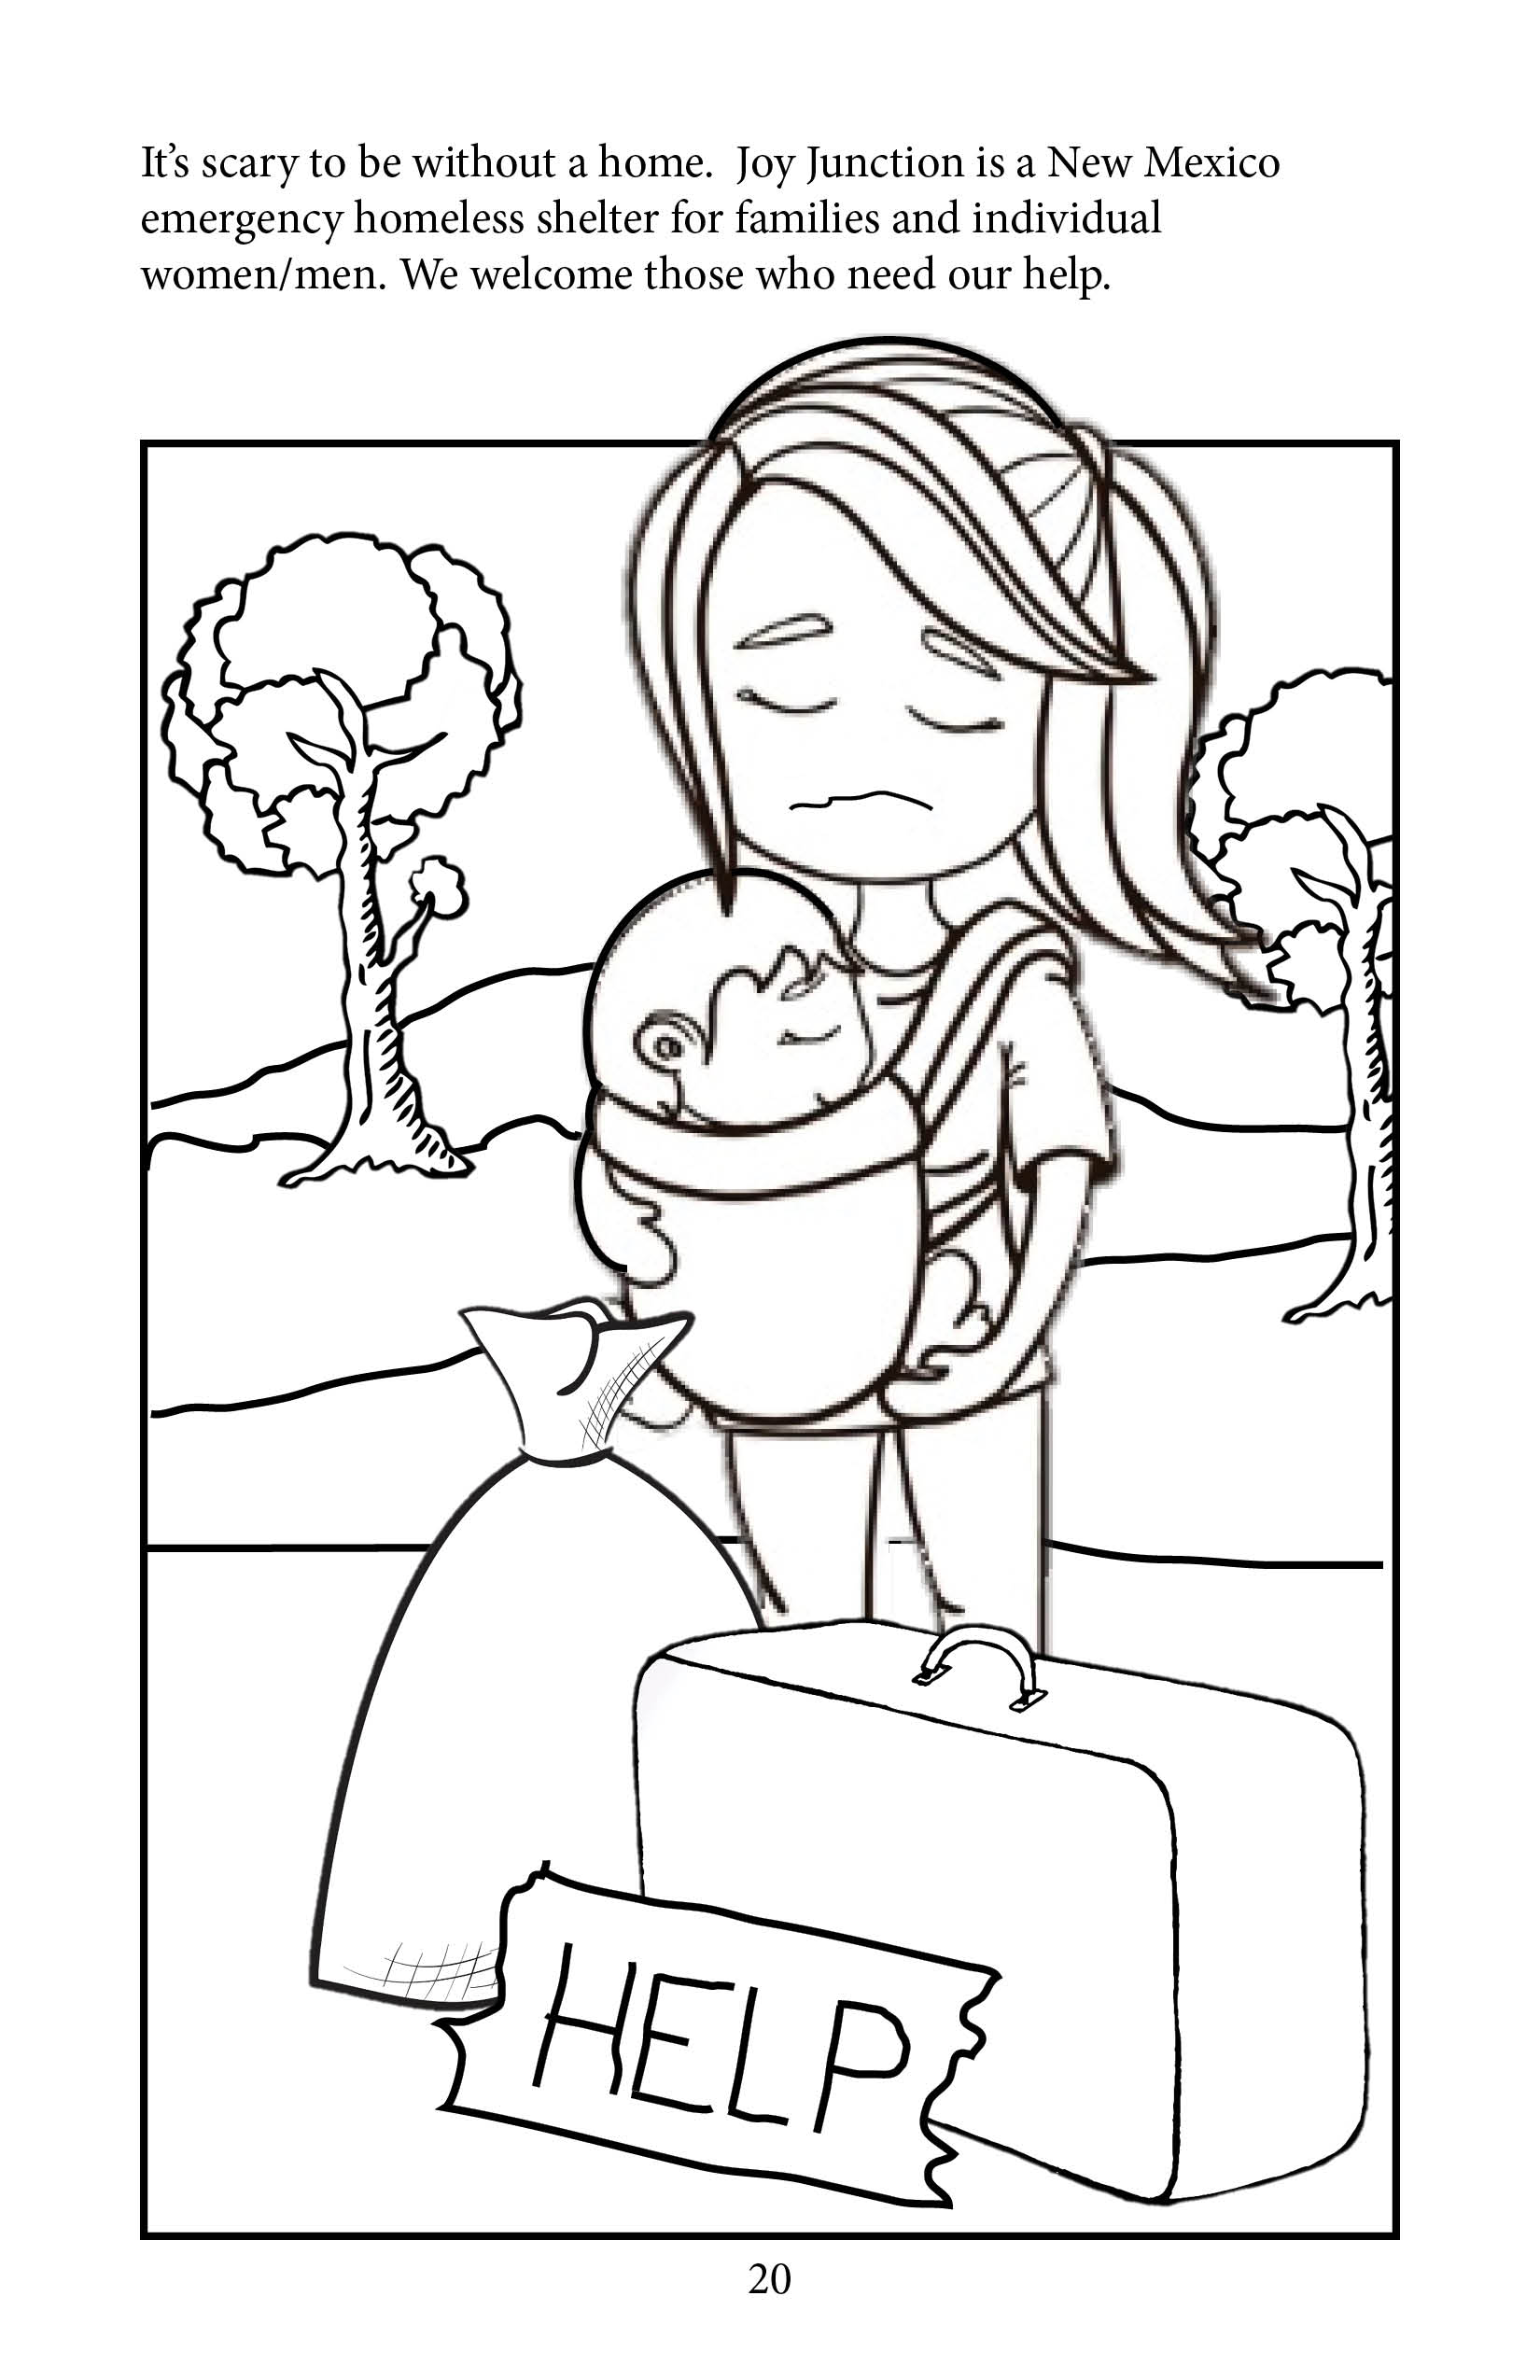 Joy Junction Coloring Book Page 20